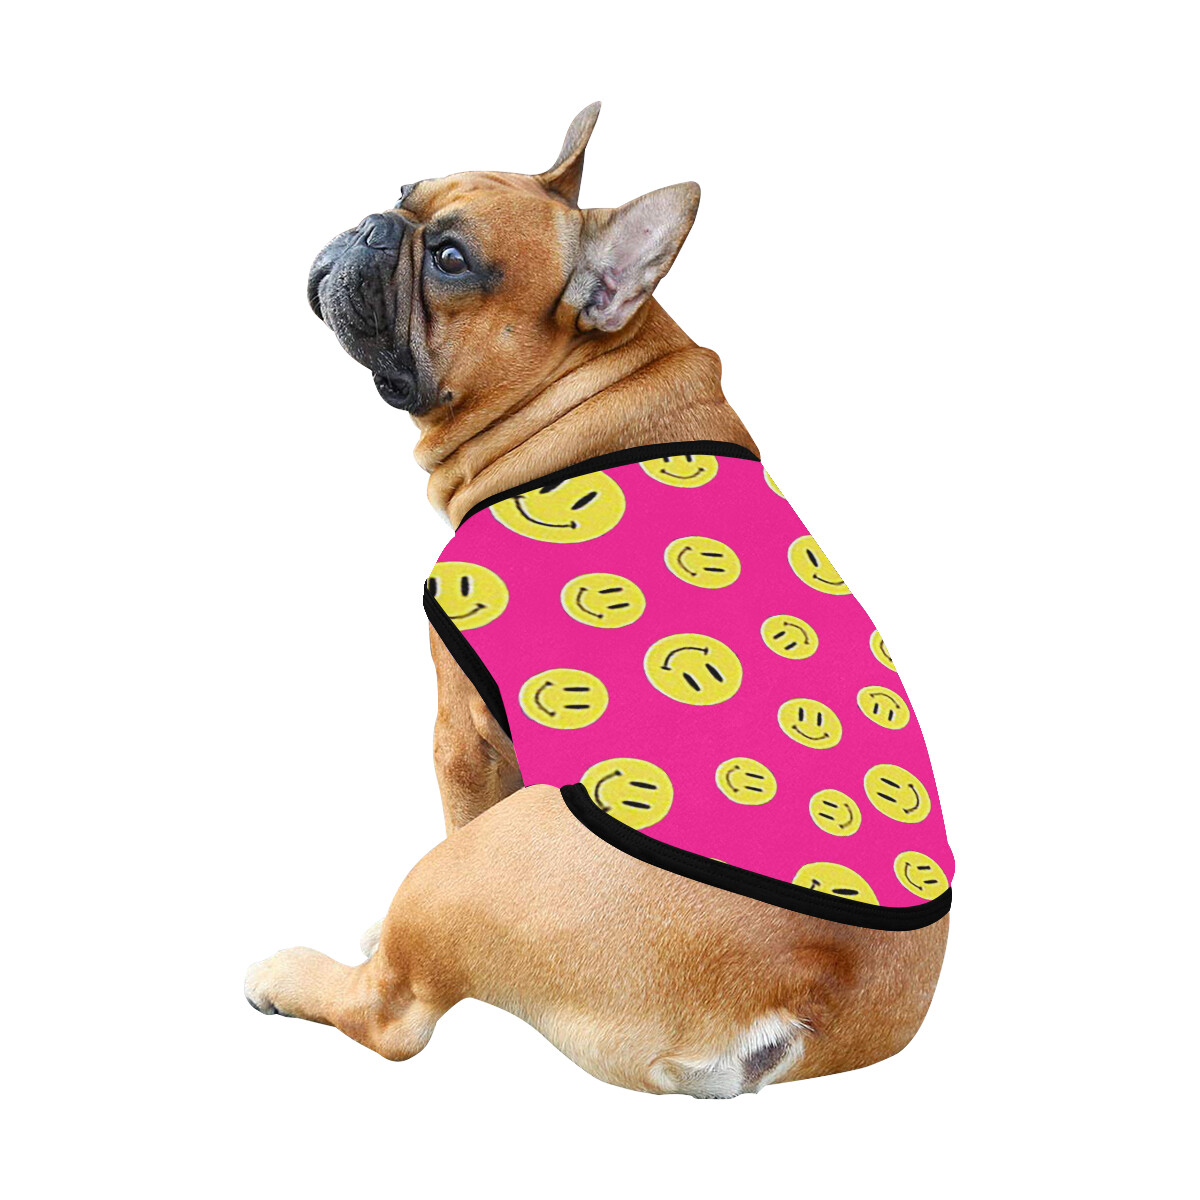 🐕 Happy faces Dog Tank Top, Dog shirt, Dog clothes, Gifts, front back print, 7 sizes XS to 3XL, dog t-shirt, dog t-shirt, dog gift, hot pink